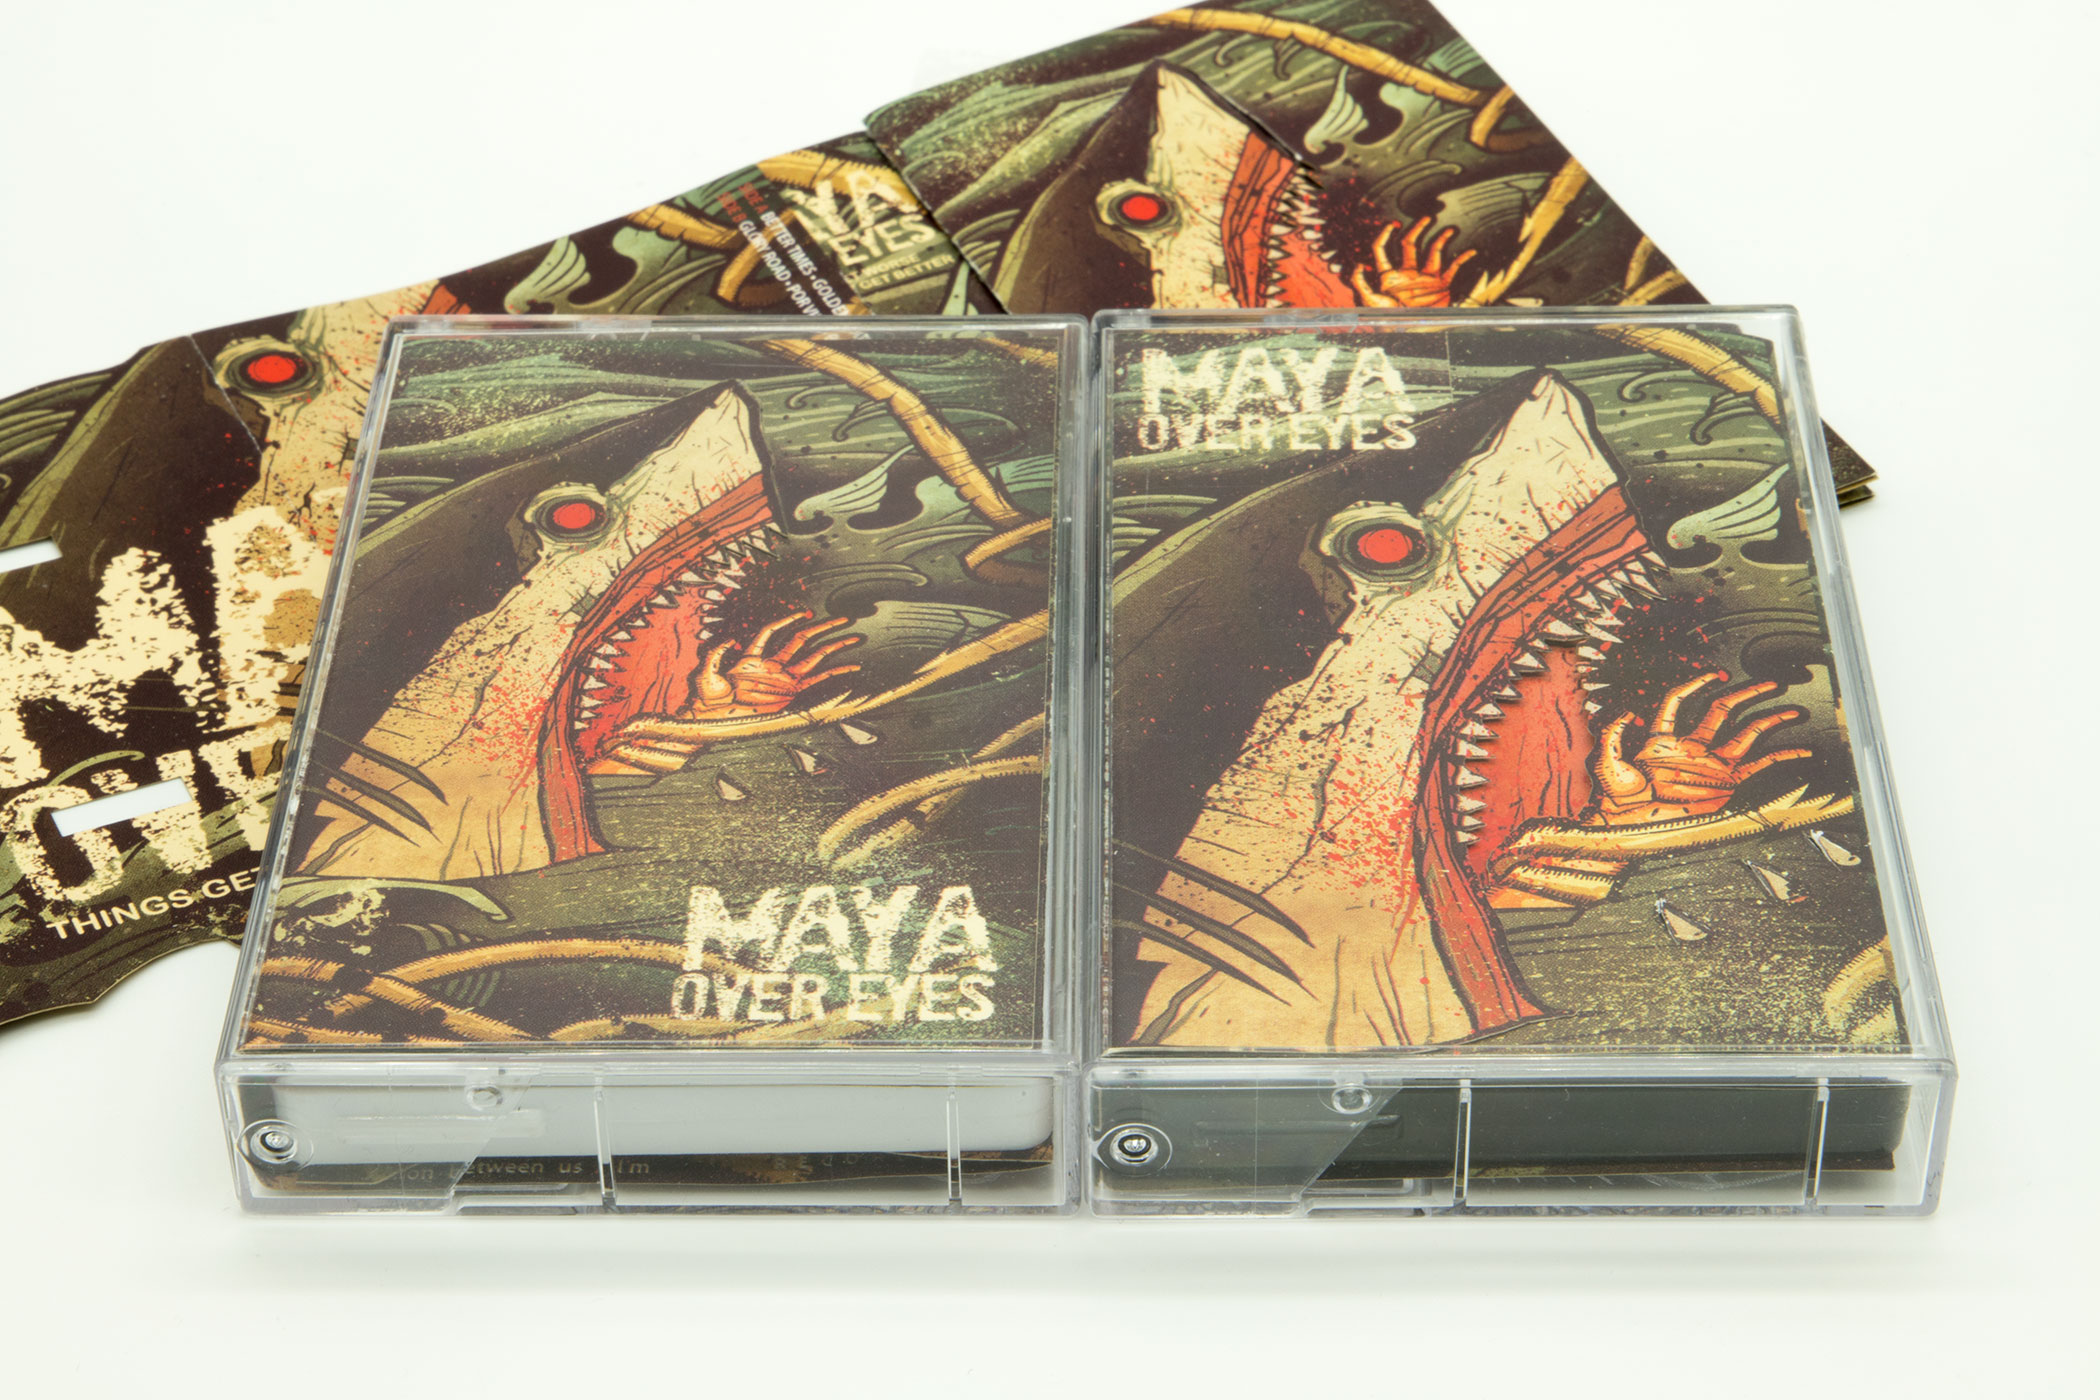 MAYA OVER EYES “Things Get Worse Before They Get Better” Etched Cassette Tape